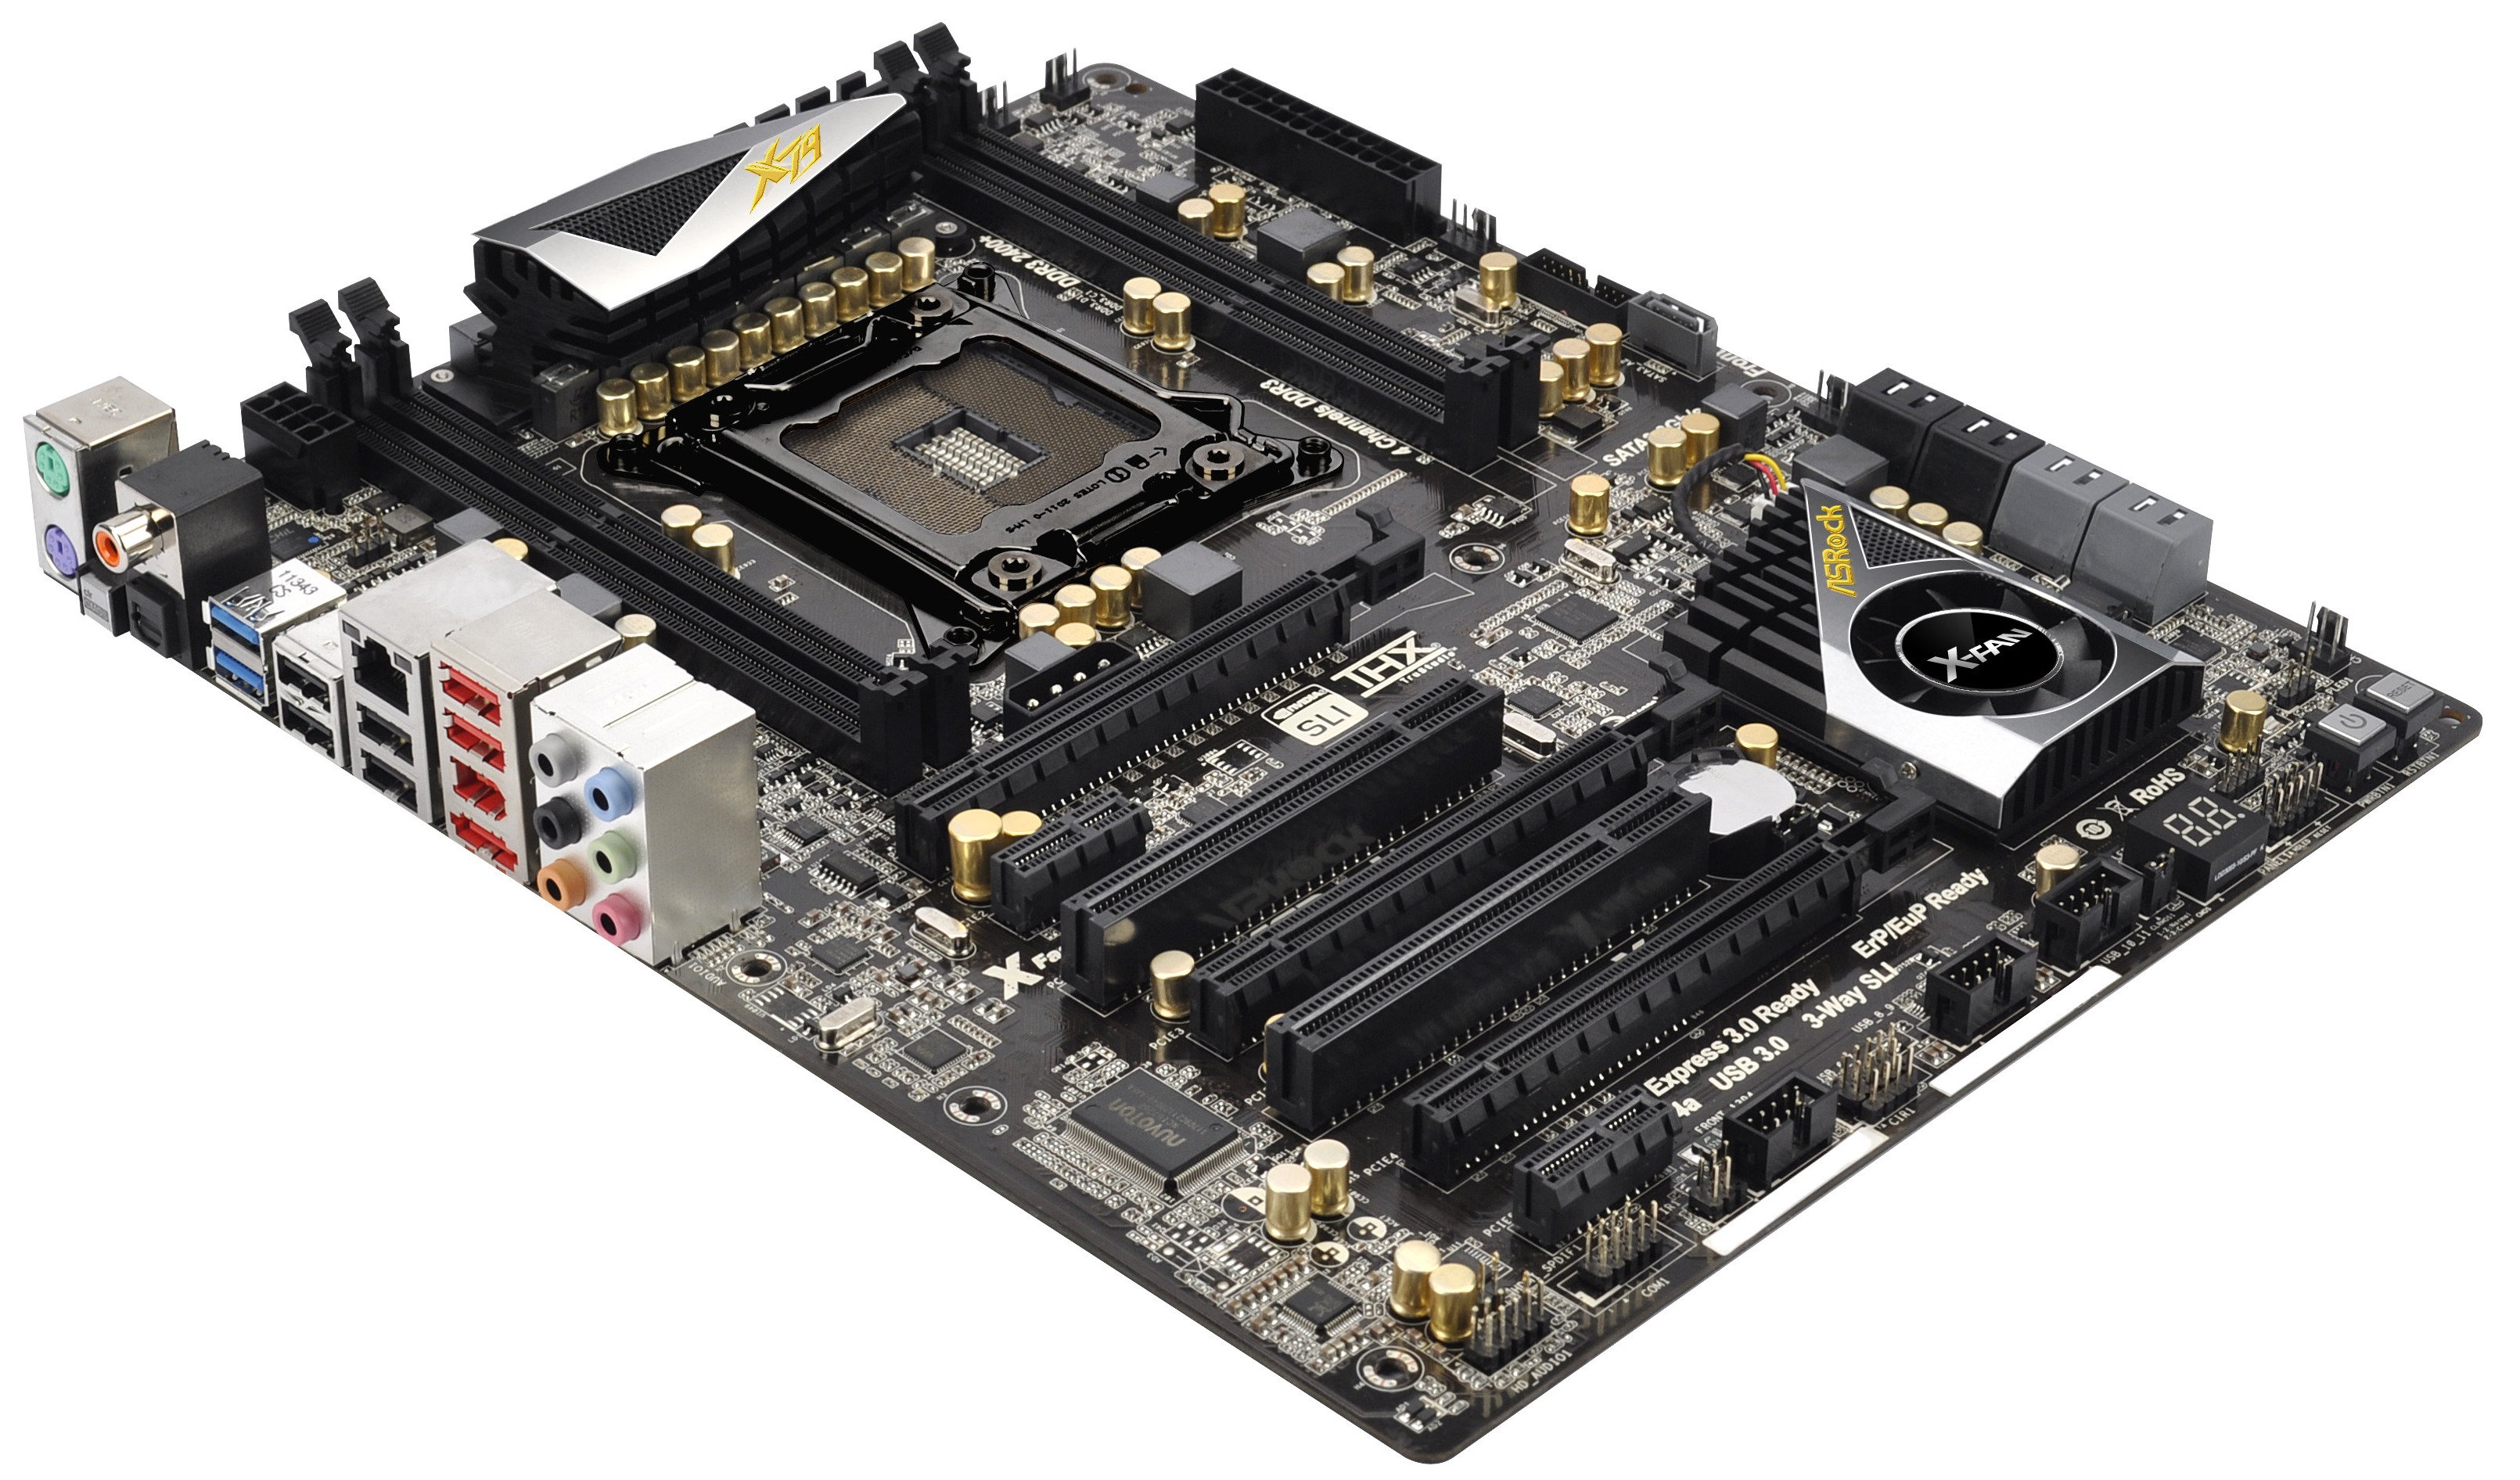 ASRock X79 Extreme4 Overview and Visual Inspection - ASRock X79